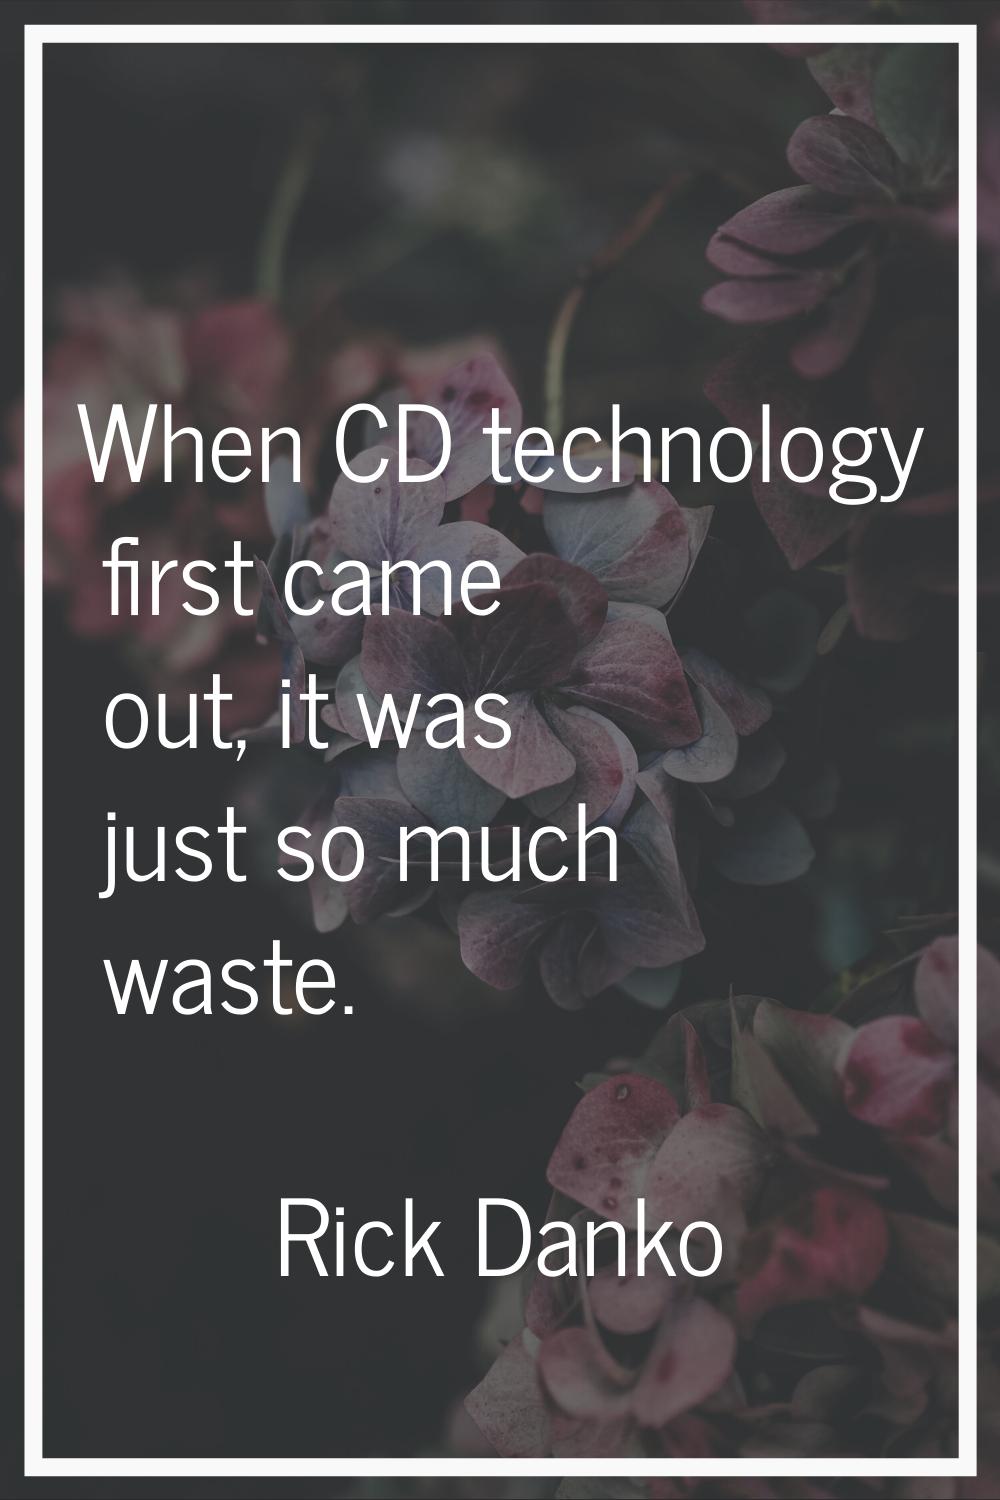 When CD technology first came out, it was just so much waste.